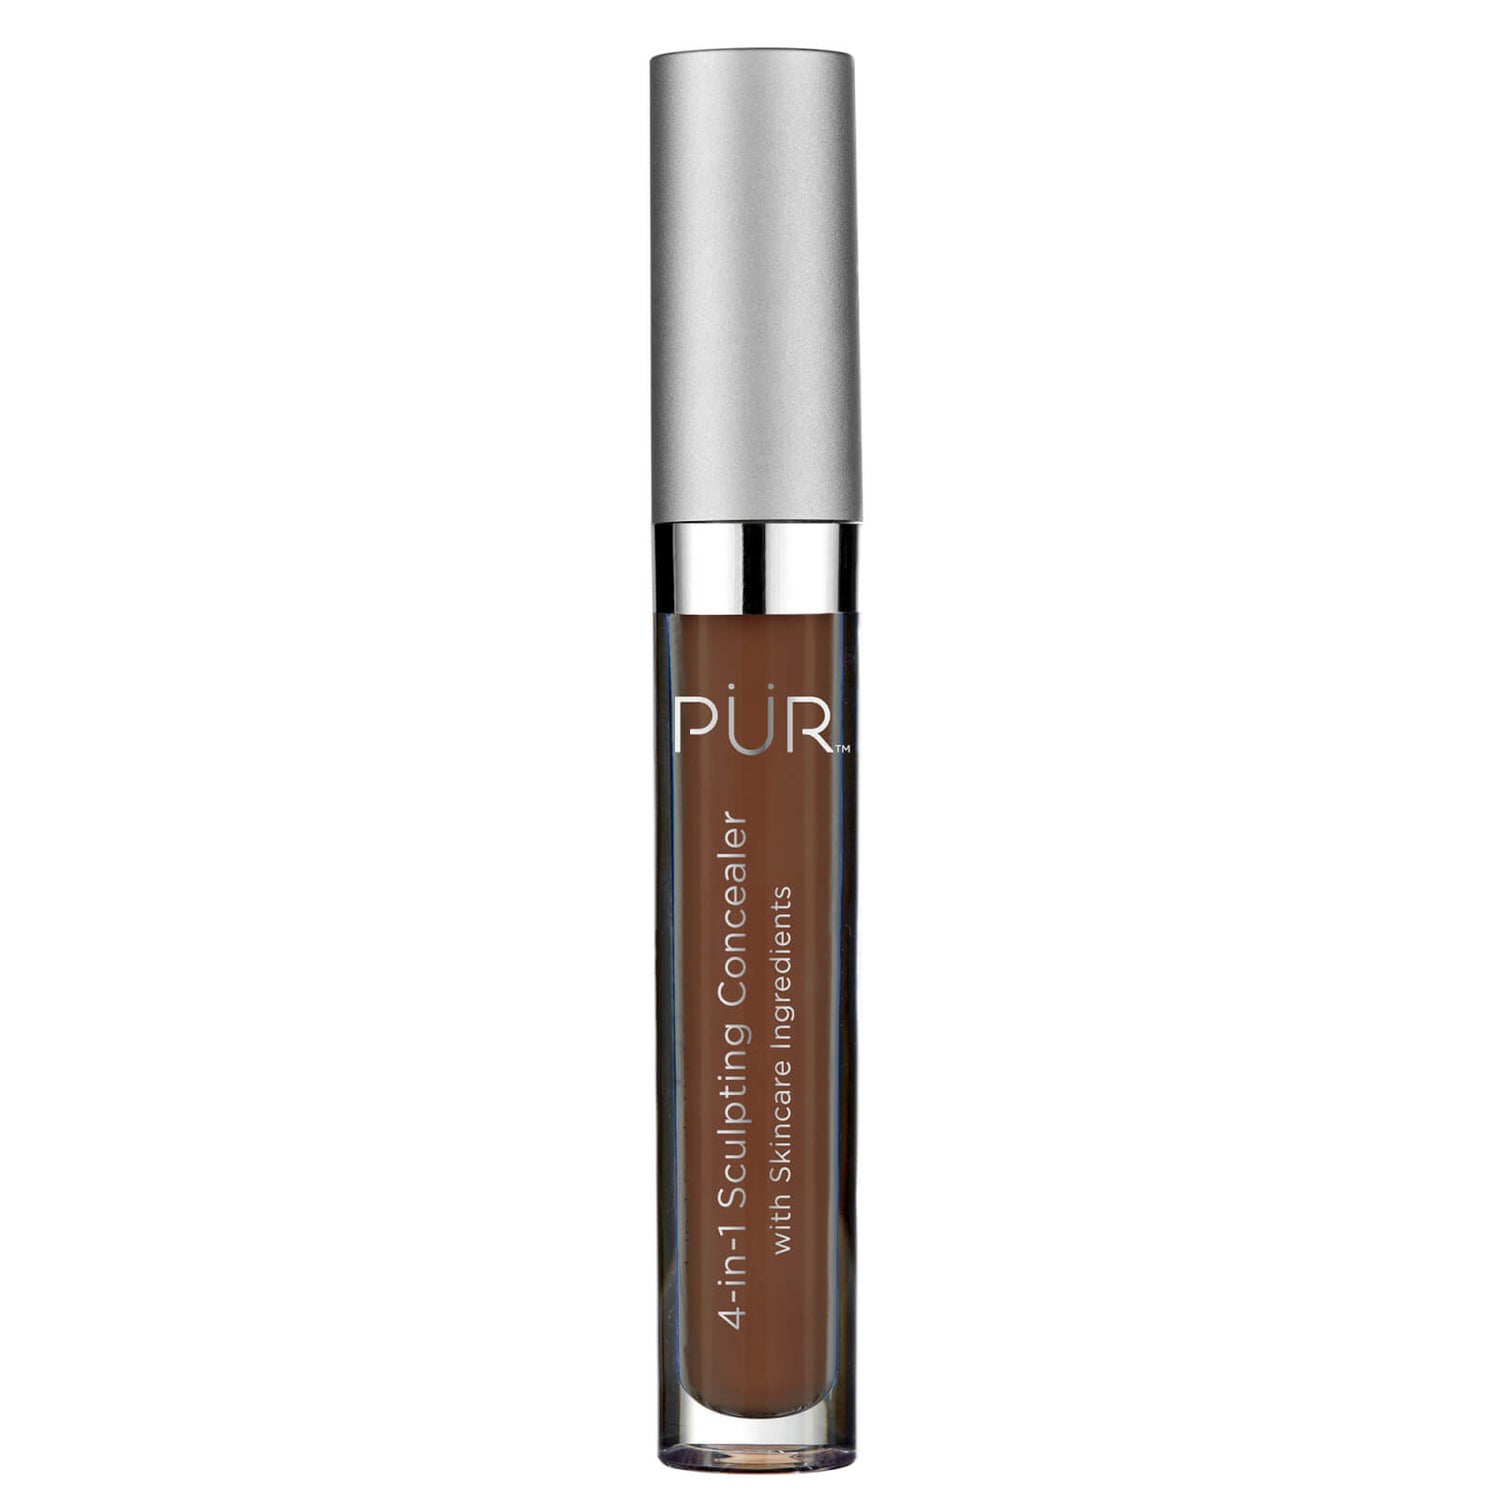 PÜR 4-in-1 Sculpting Concealer with Skincare Ingredients 3.76g (Various Shades)